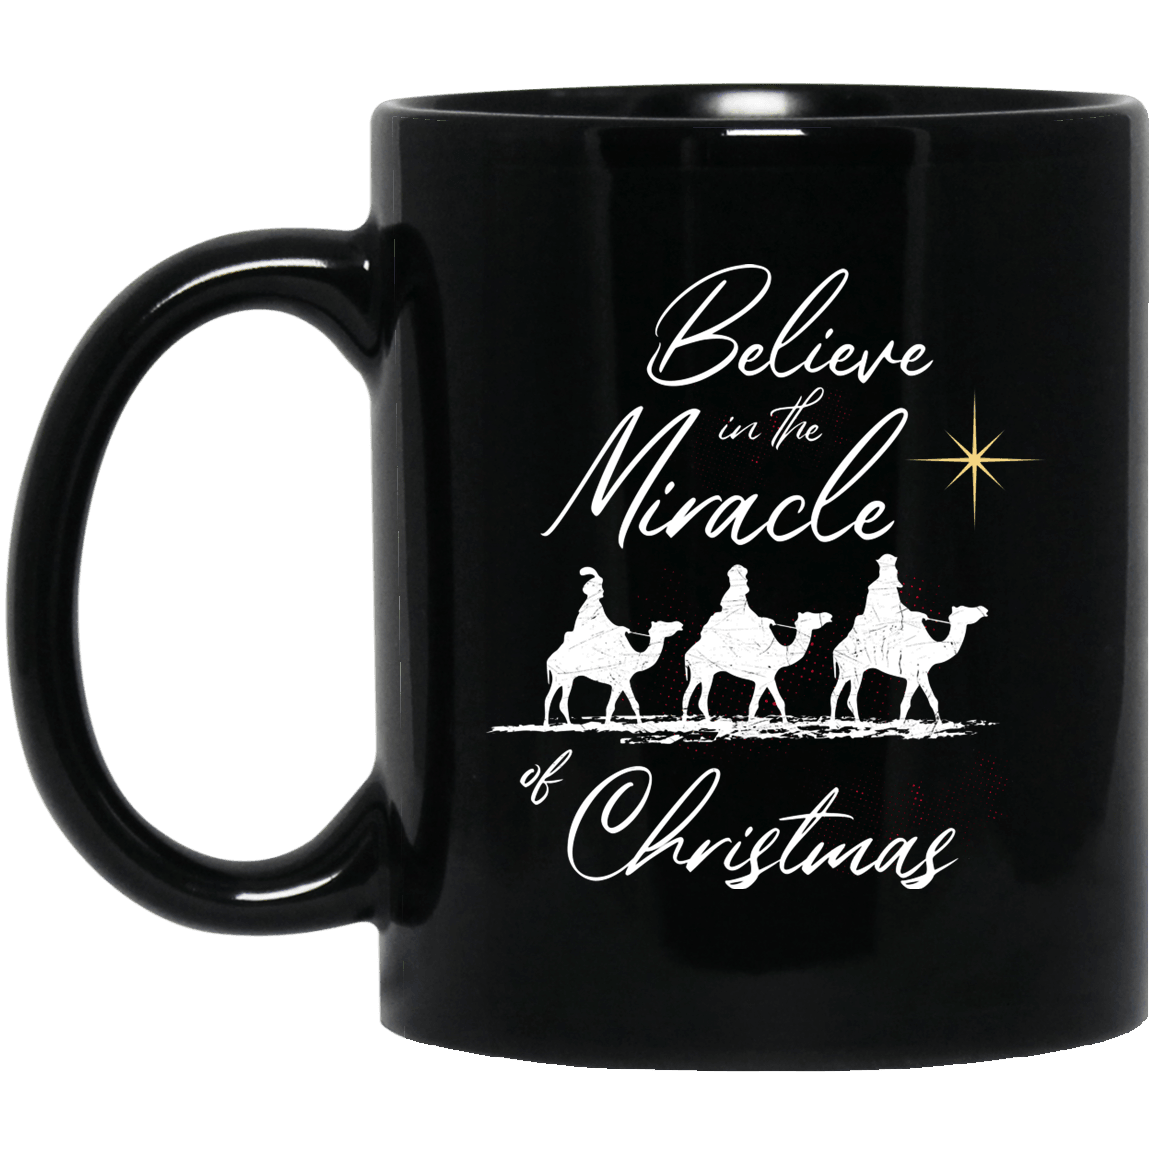 Designs by MyUtopia Shout Out:Believe in the Miracle - Ceramic Coffee Mug - Black,Black / 11 oz,Apparel